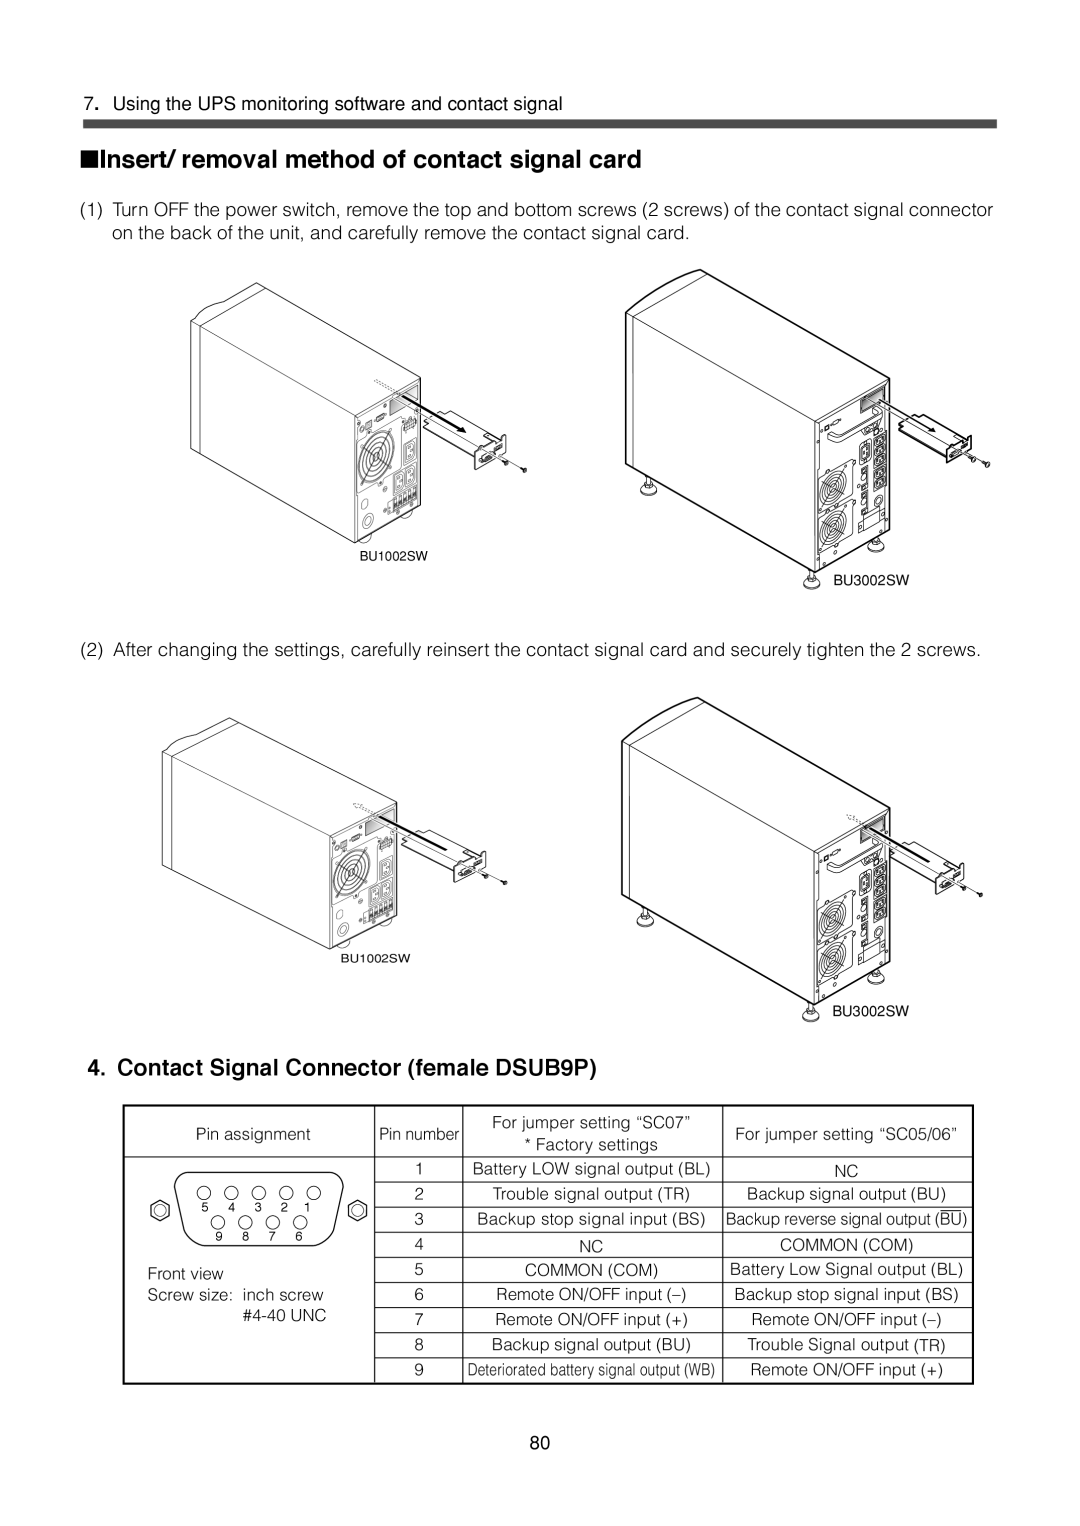 Omron BU3002SW, BU1002SW Insert/ removal method of contact signal card, Contact Signal Connector female DSUB9P 